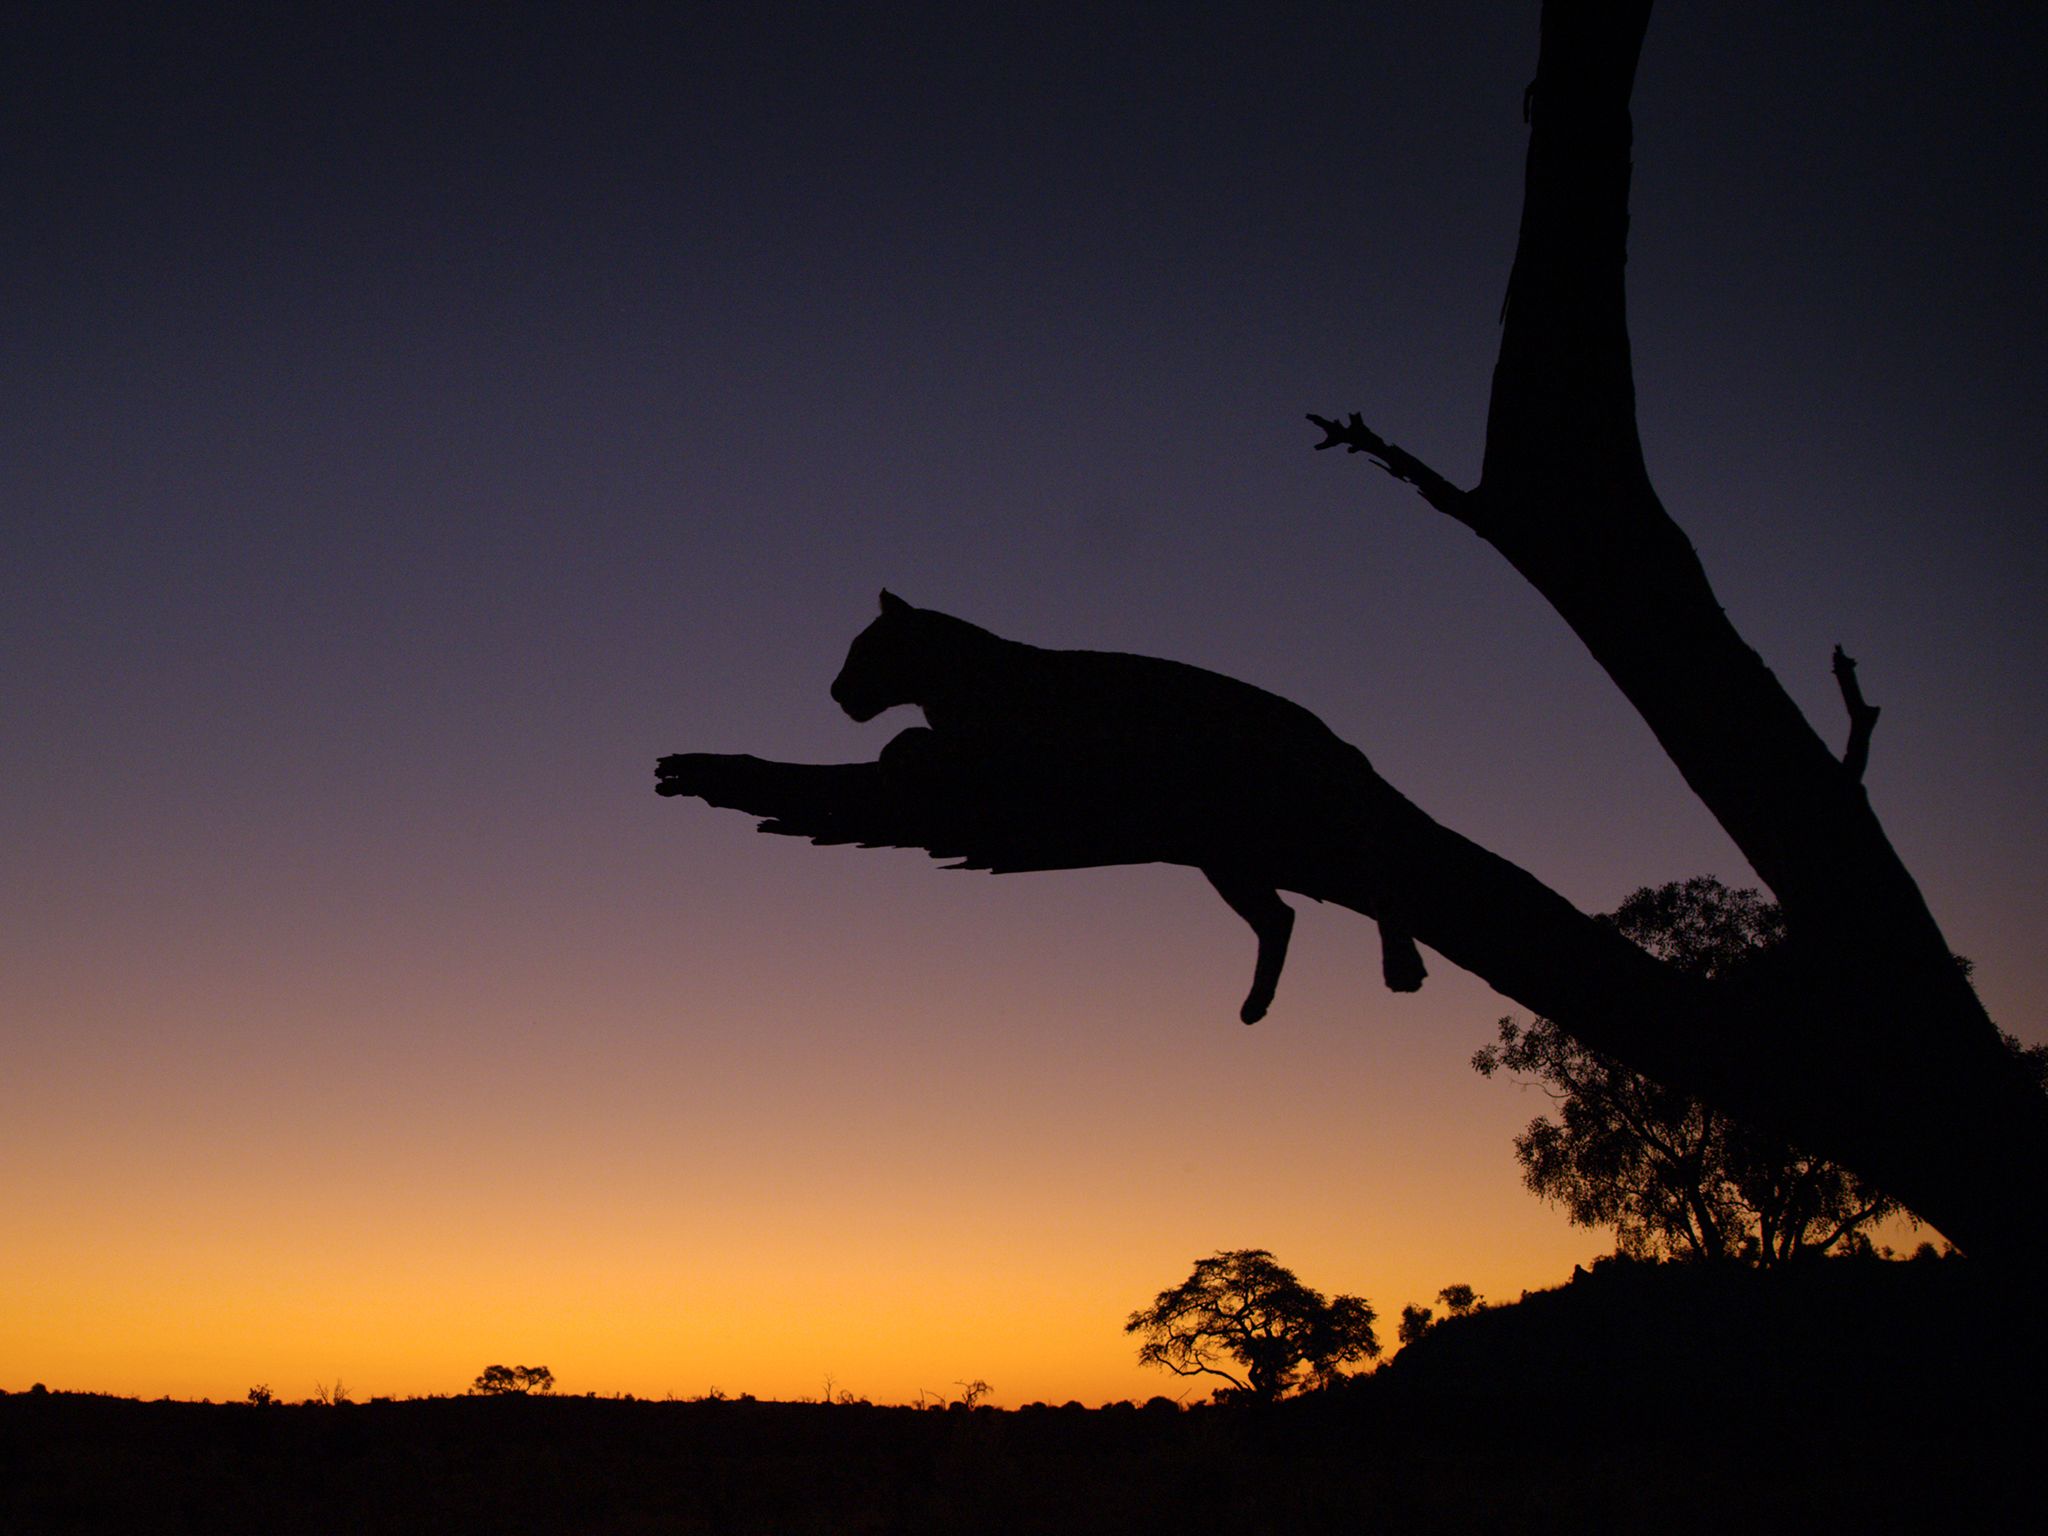 Botswana: Saba observes from dead acacia tree at dawn. This image is from Savage Kingdom. [Photo of the day - November 2016]